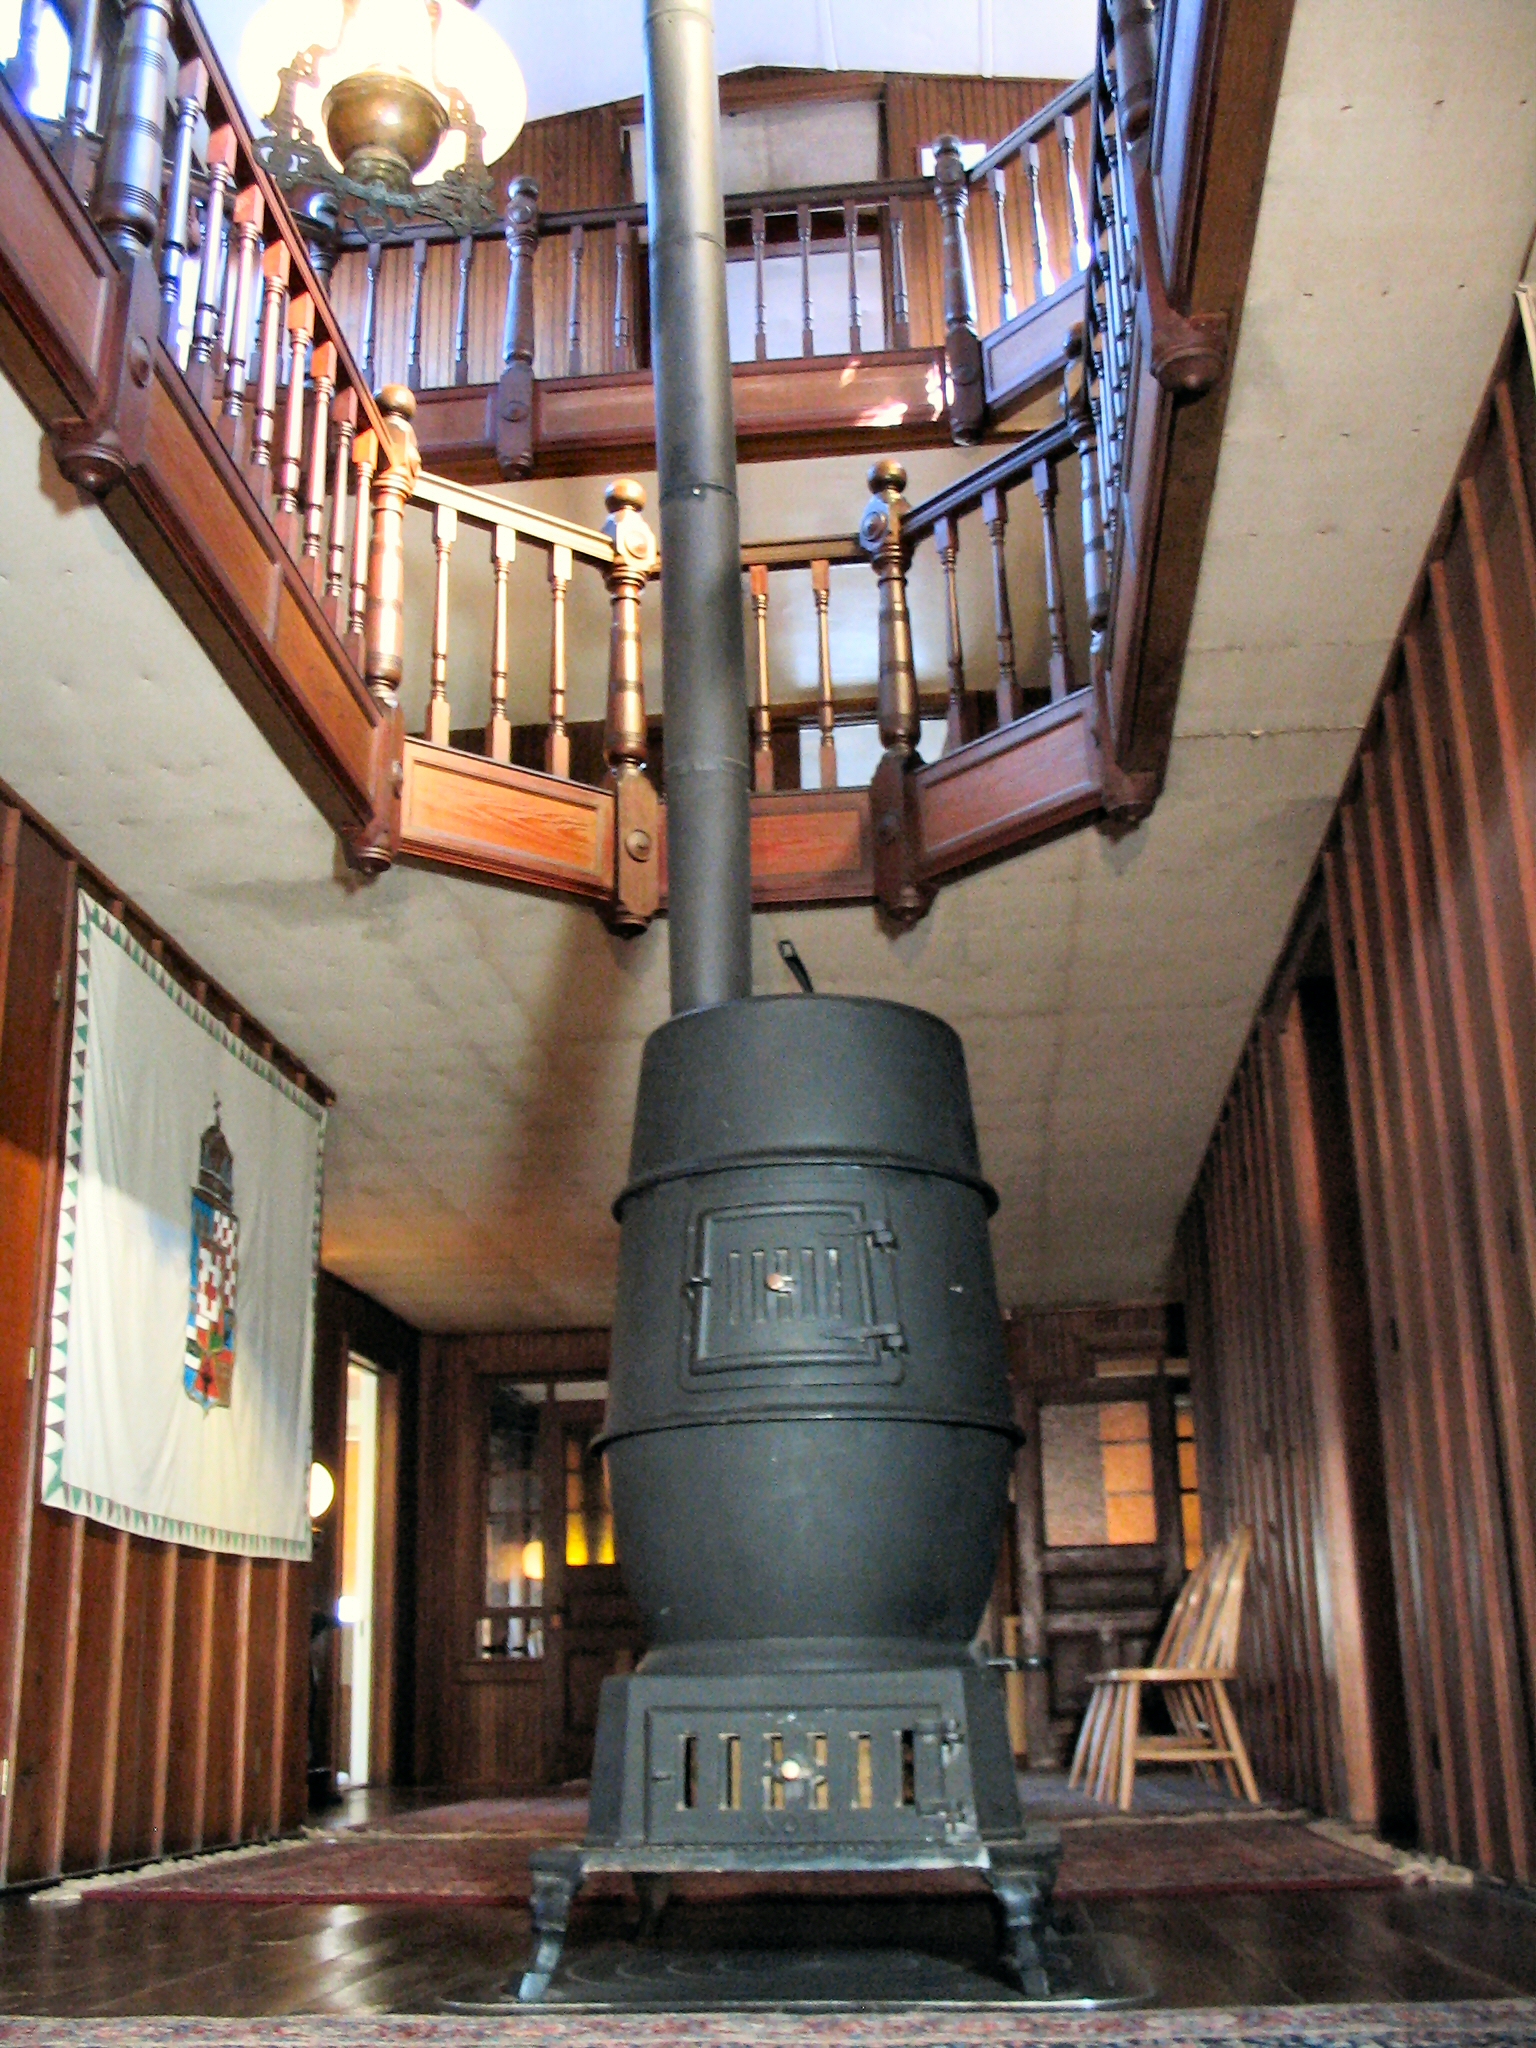 large potbelly stove in center hallway with open view to third floor